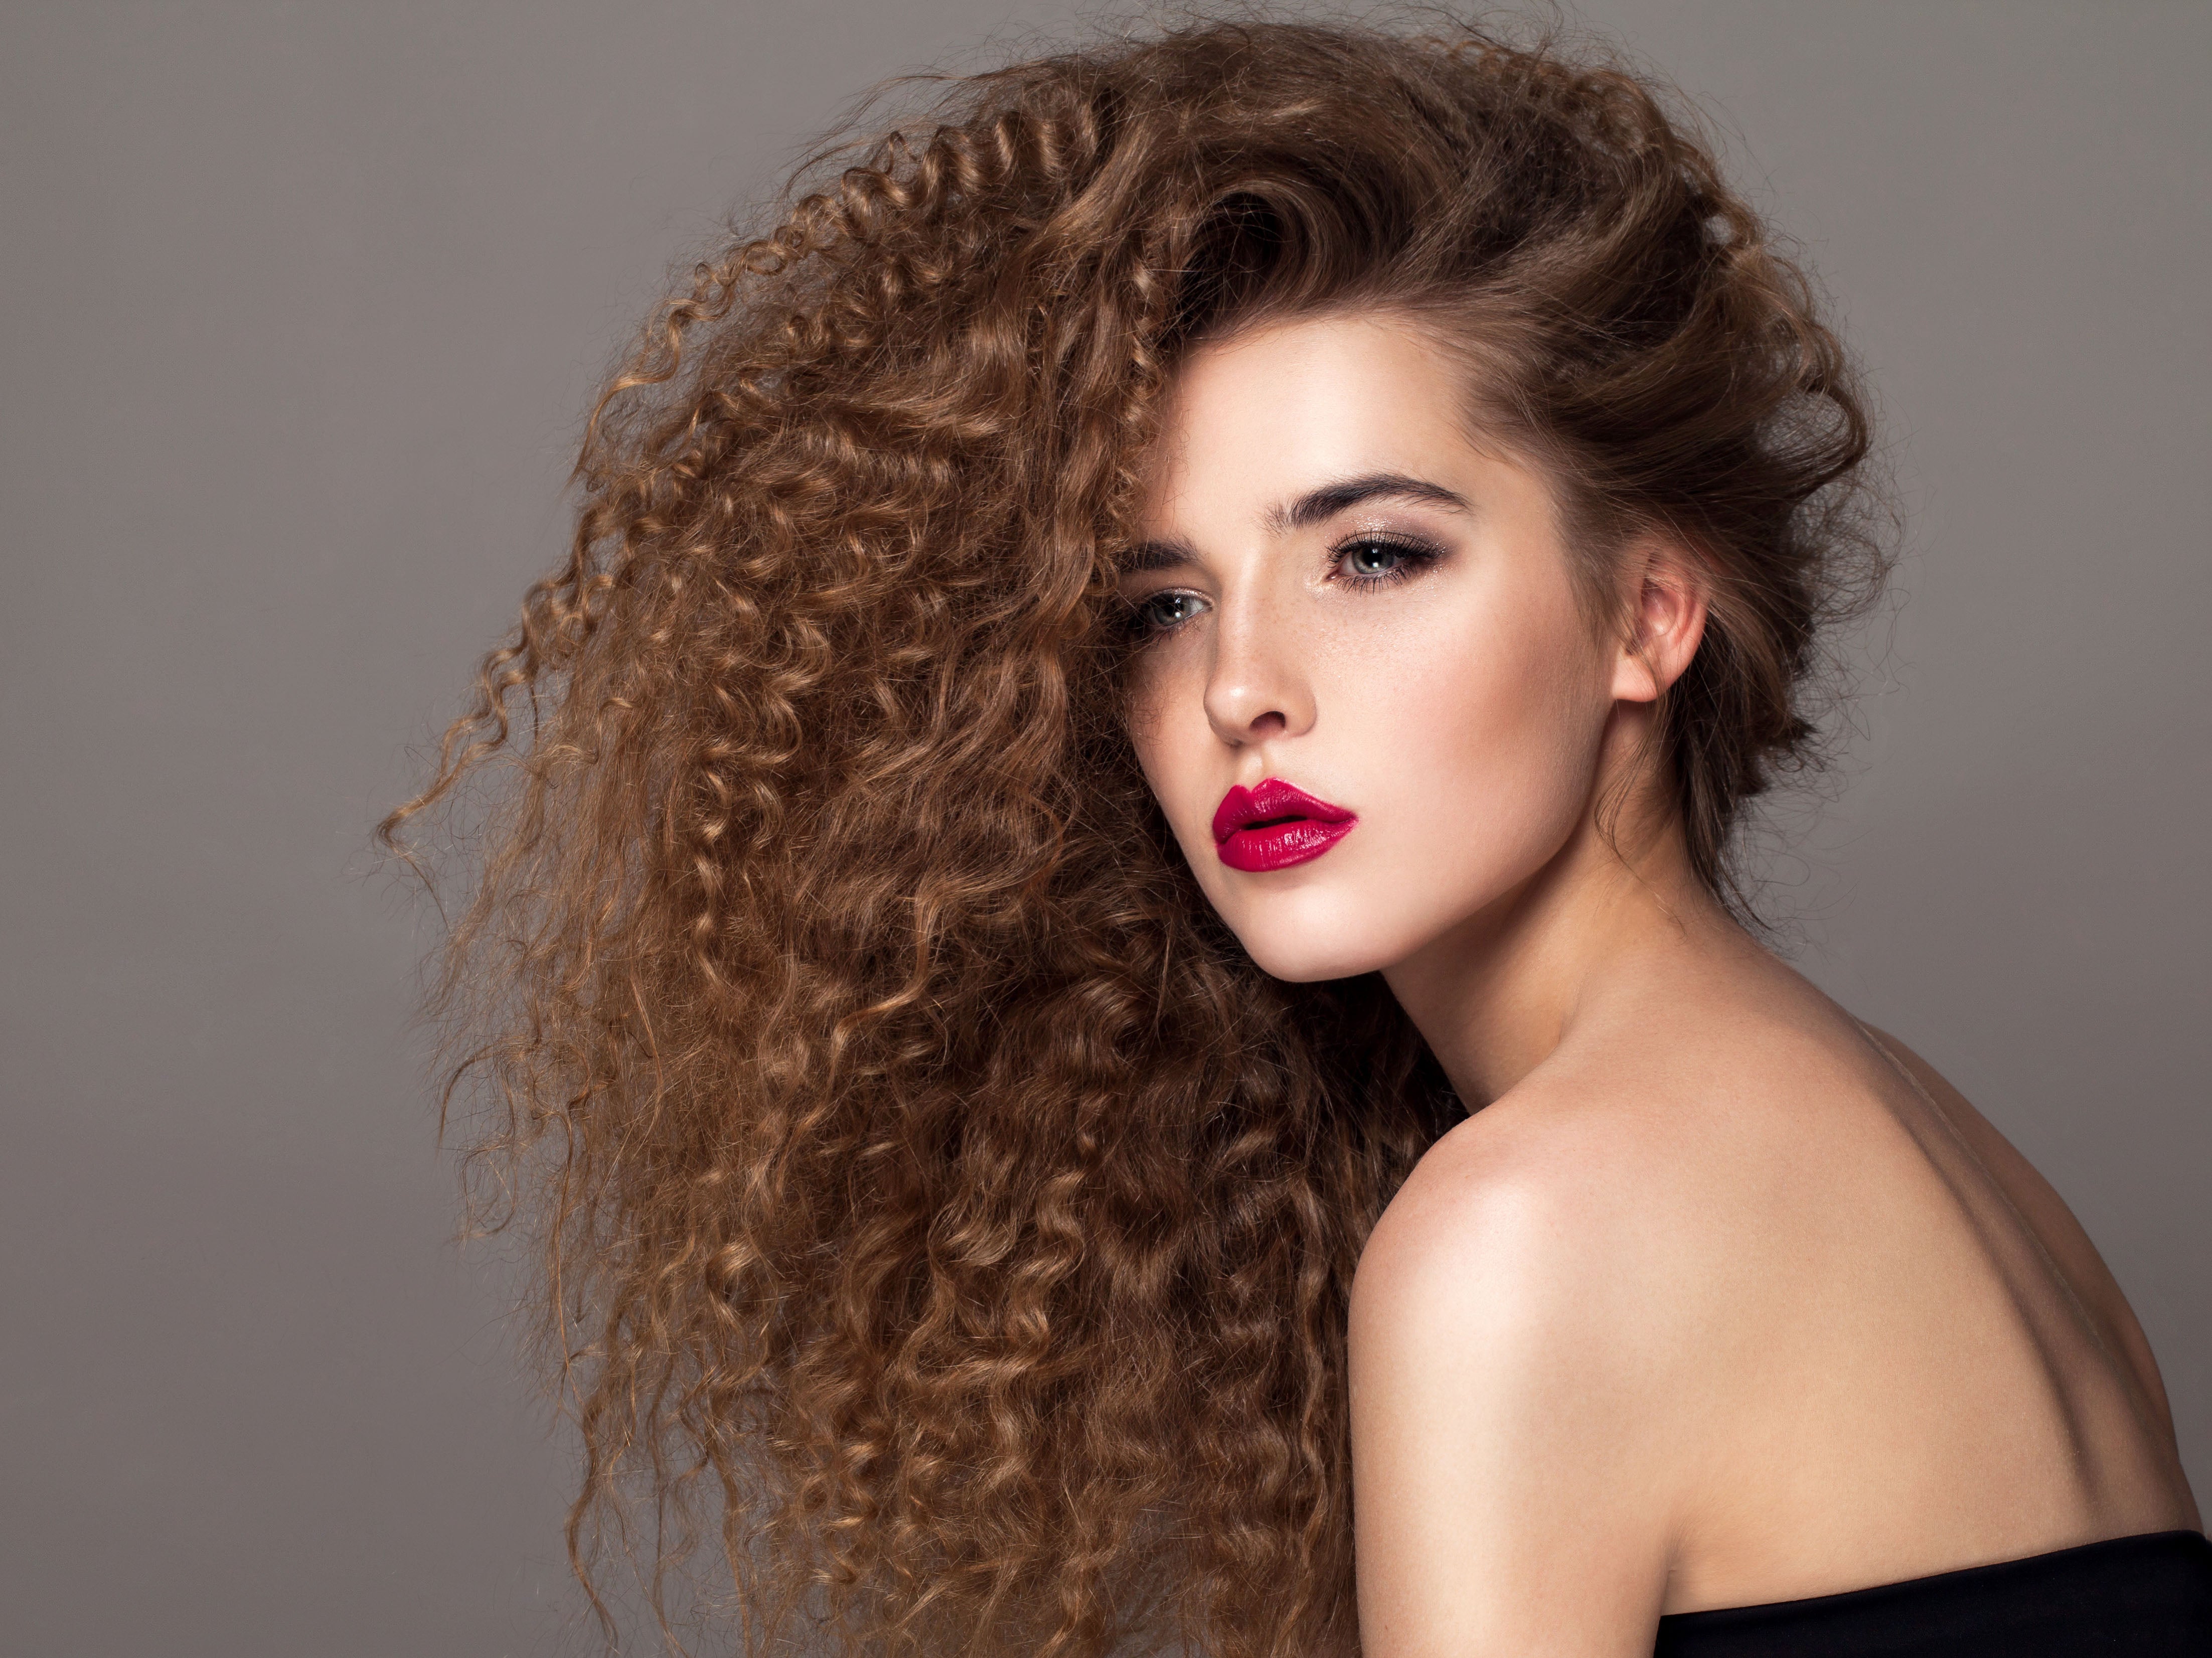 Beautiful young woman with curly and long hair extensions. Permed hair. Beautiful Woman Portrait. Blond Wavy Hair.